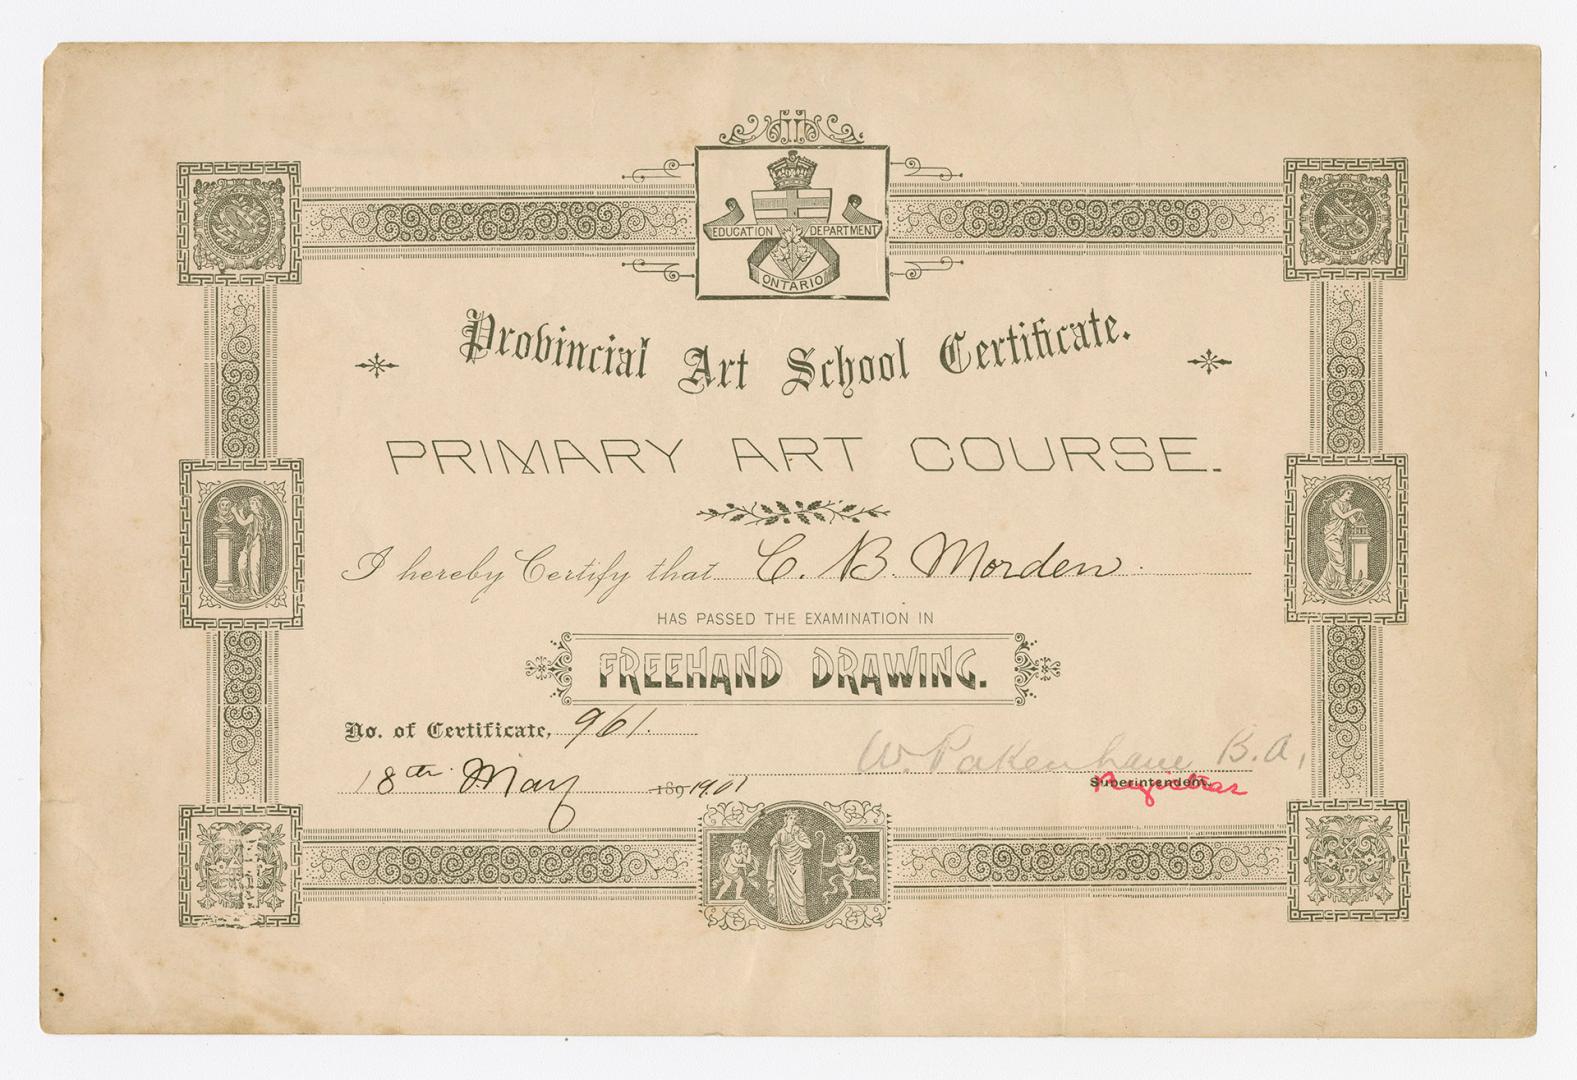 Provincial art school certificate : primary art course : I hereby certify that [C.B. Morden] has passed the examination in freehand drawing